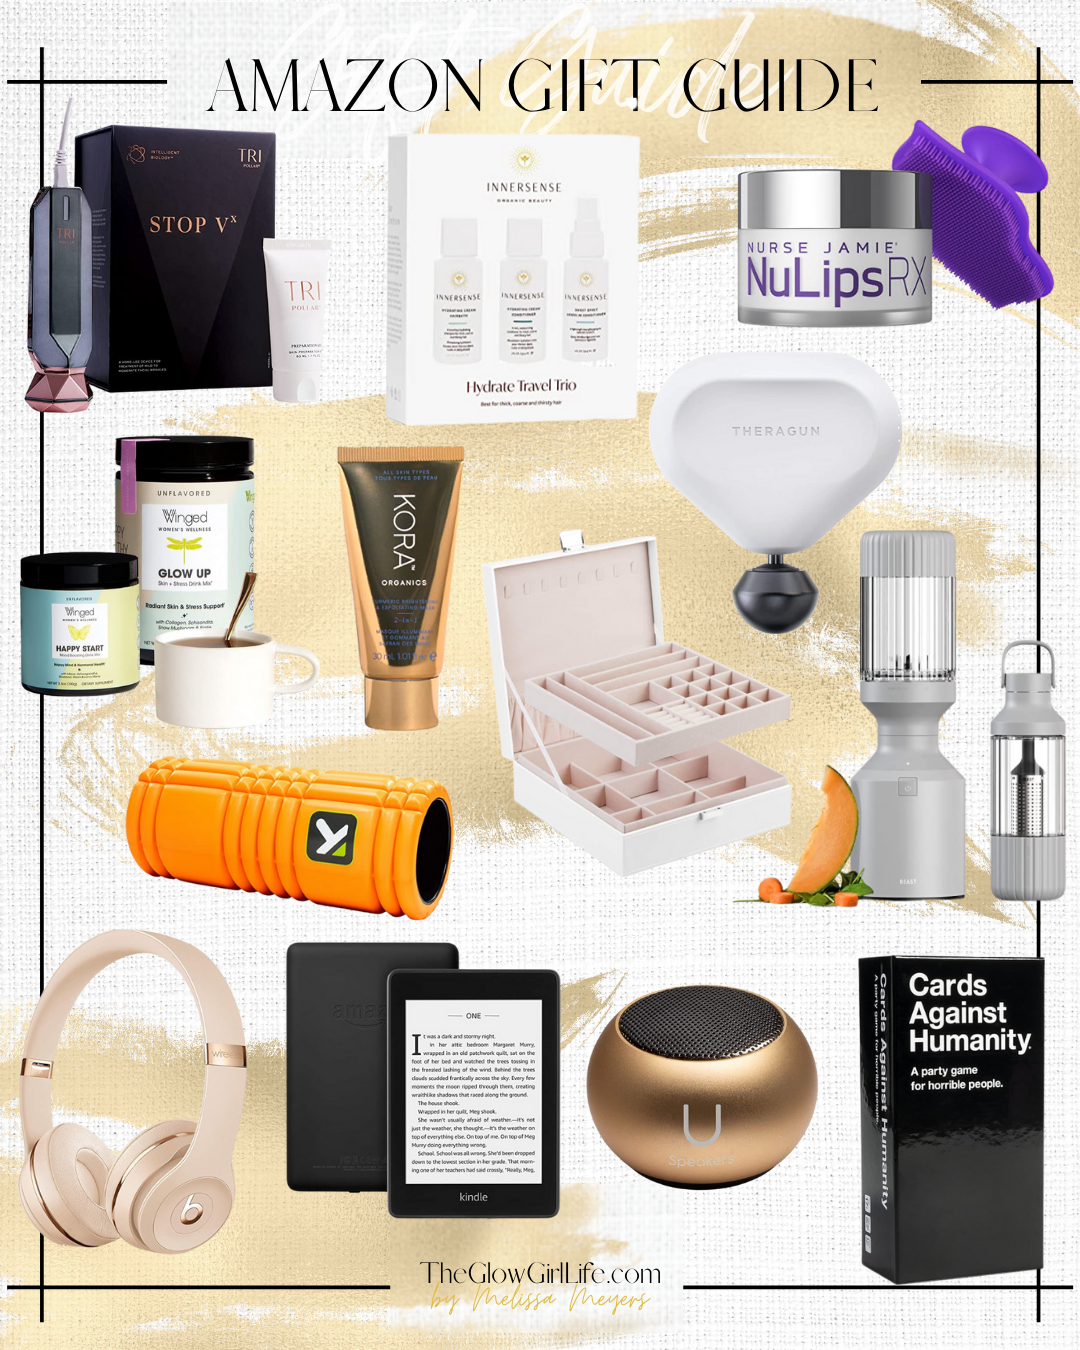 Women's Holiday Gift Guide - What Women Really Want!